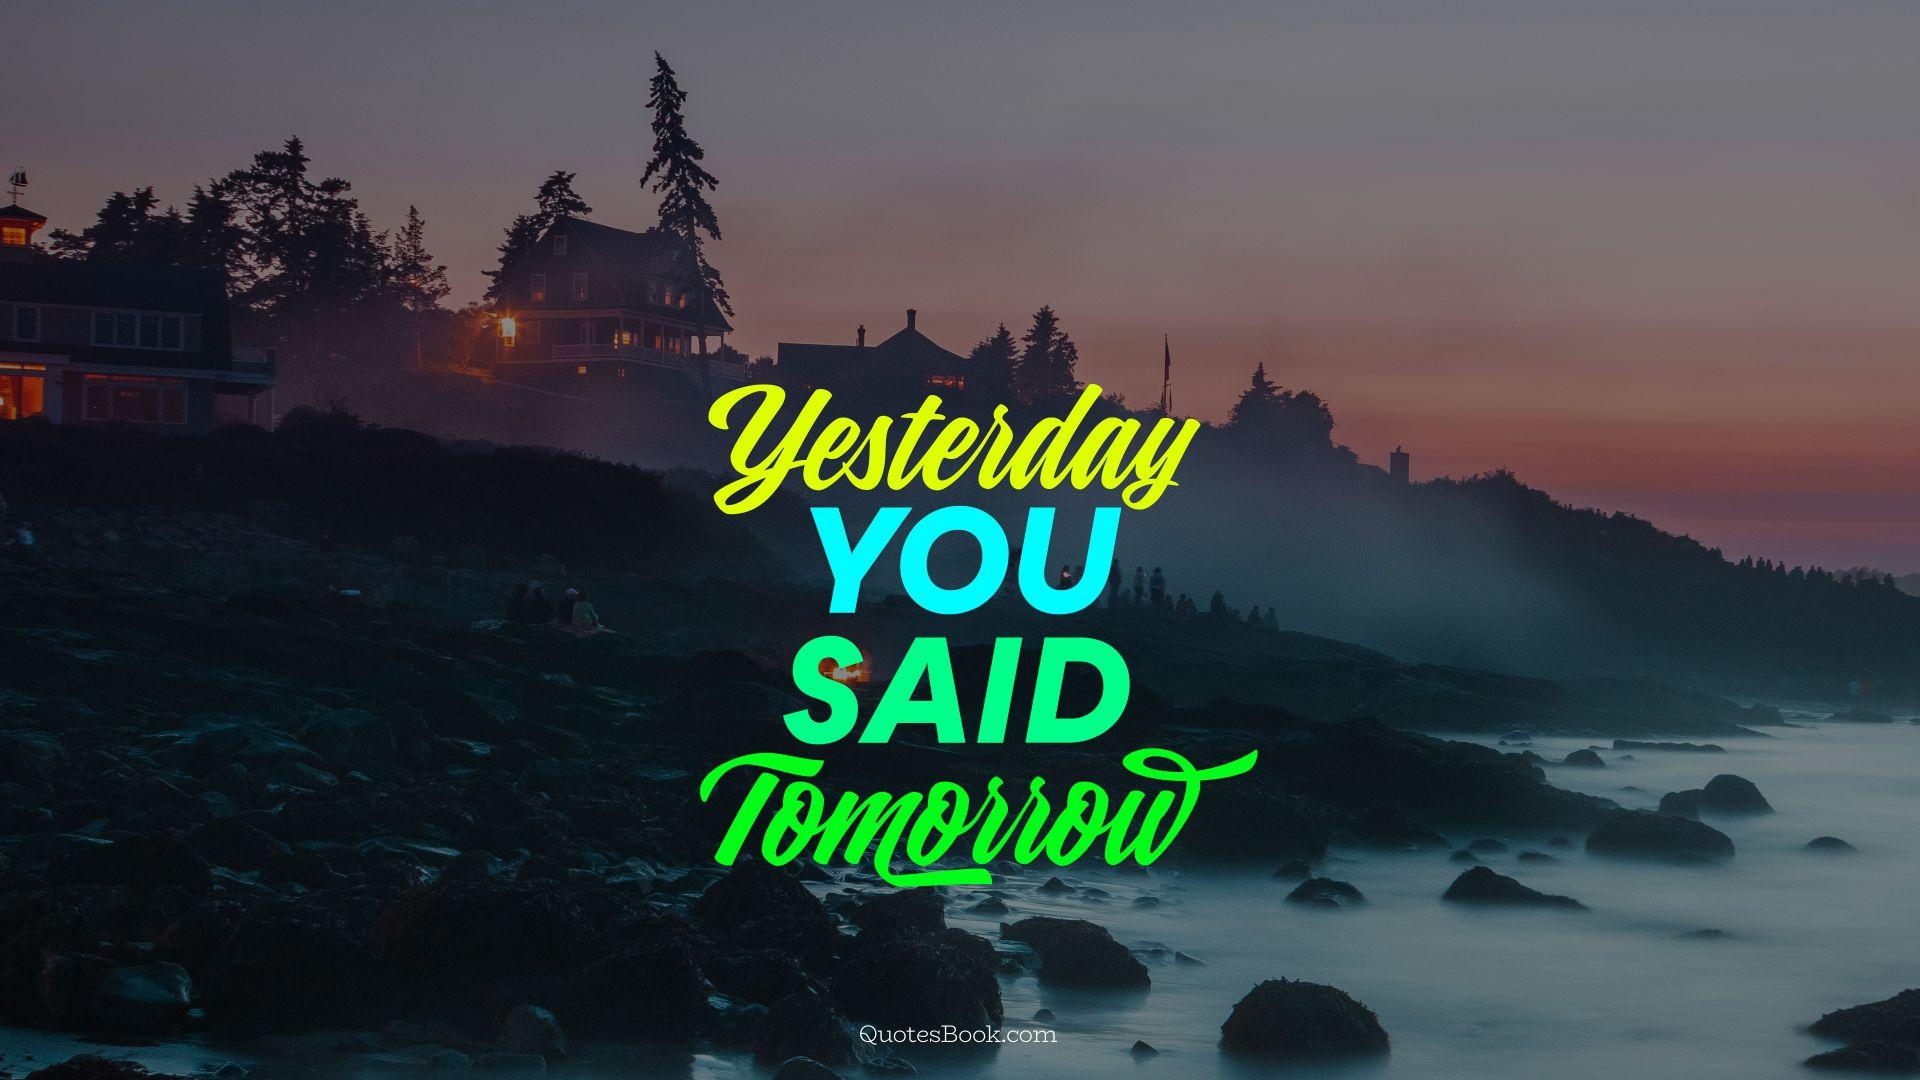 Yesterday You Said Tomorrow Wallpapers - Top Free Yesterday You Said